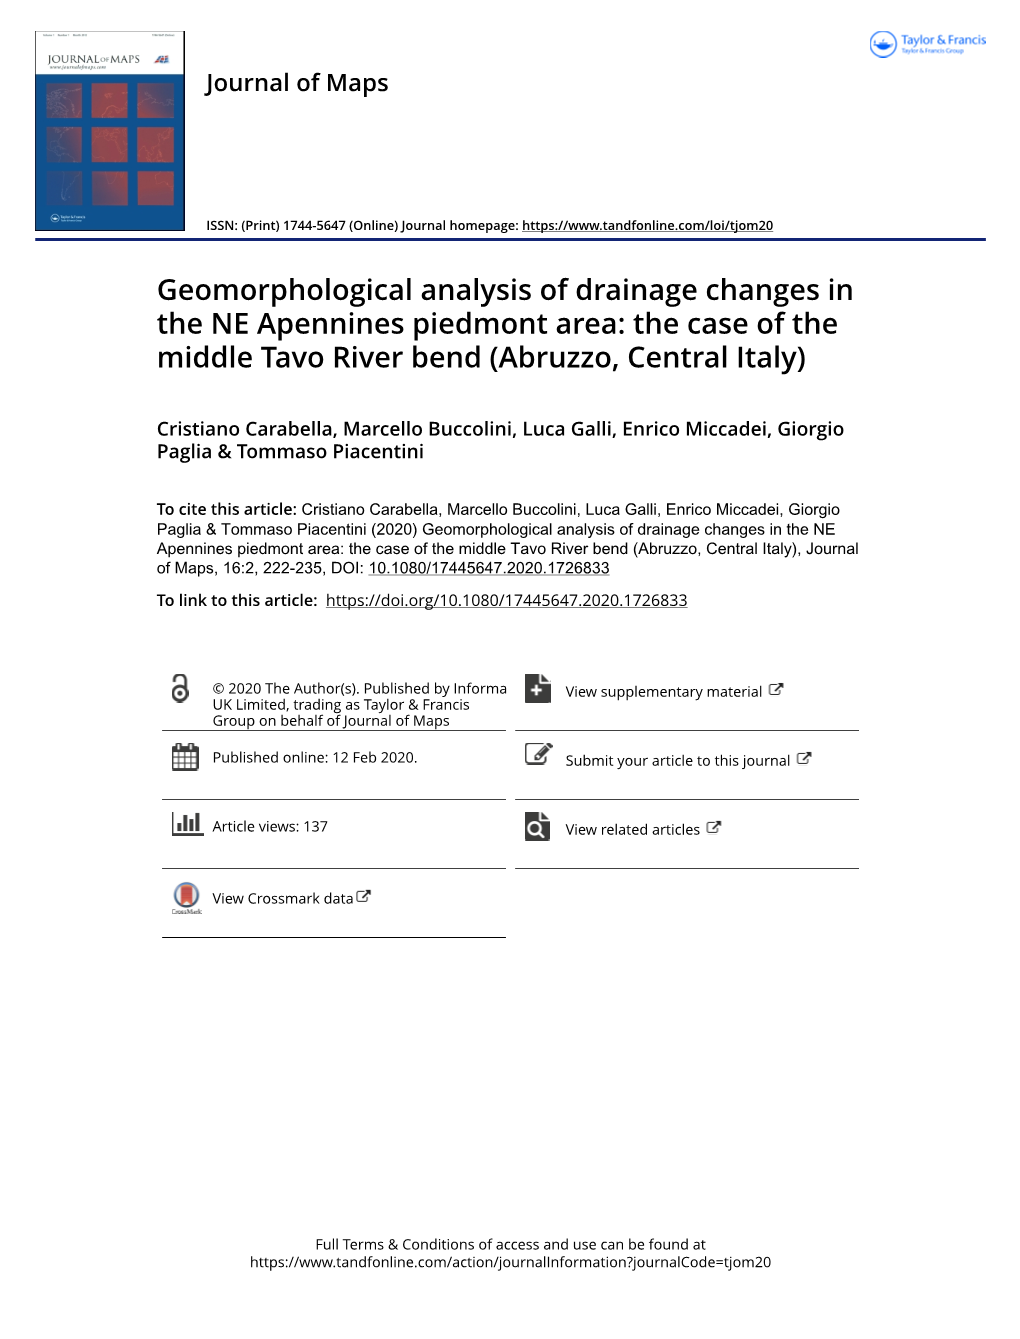 Geomorphological Analysis of Drainage Changes in the NE Apennines Piedmont Area: the Case of the Middle Tavo River Bend (Abruzzo, Central Italy)